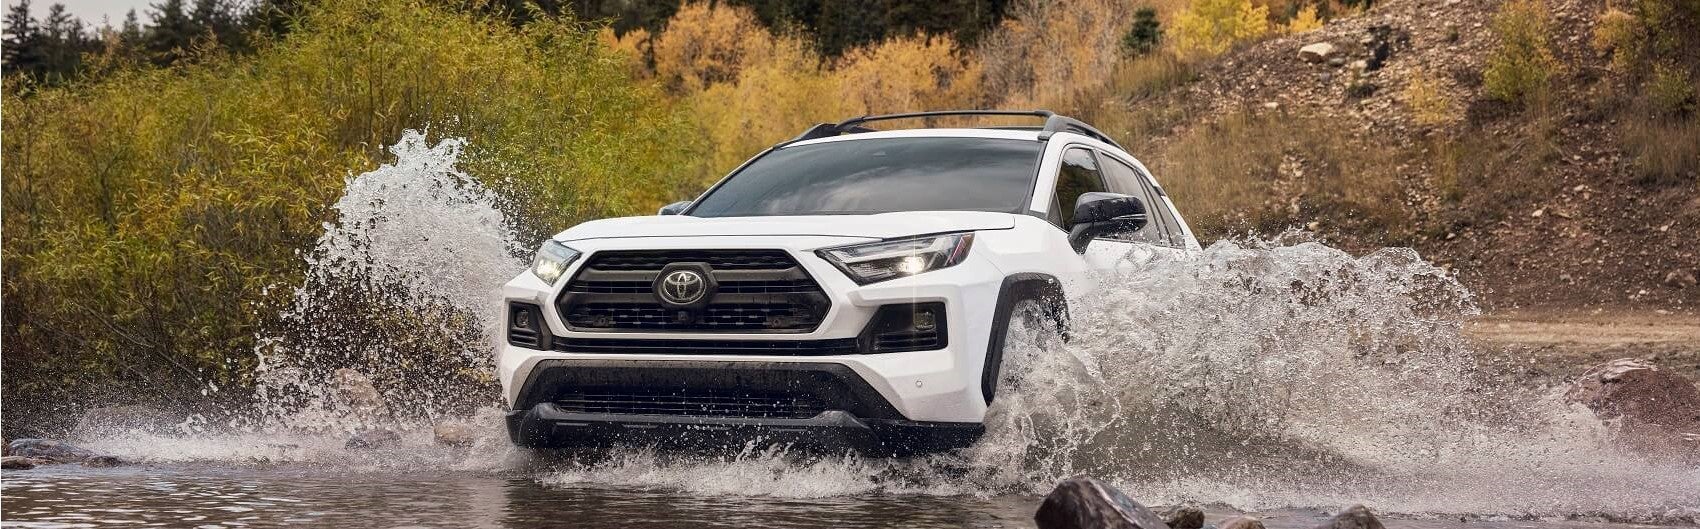 2022 Toyota RAV4 Off Road 2 Snipped